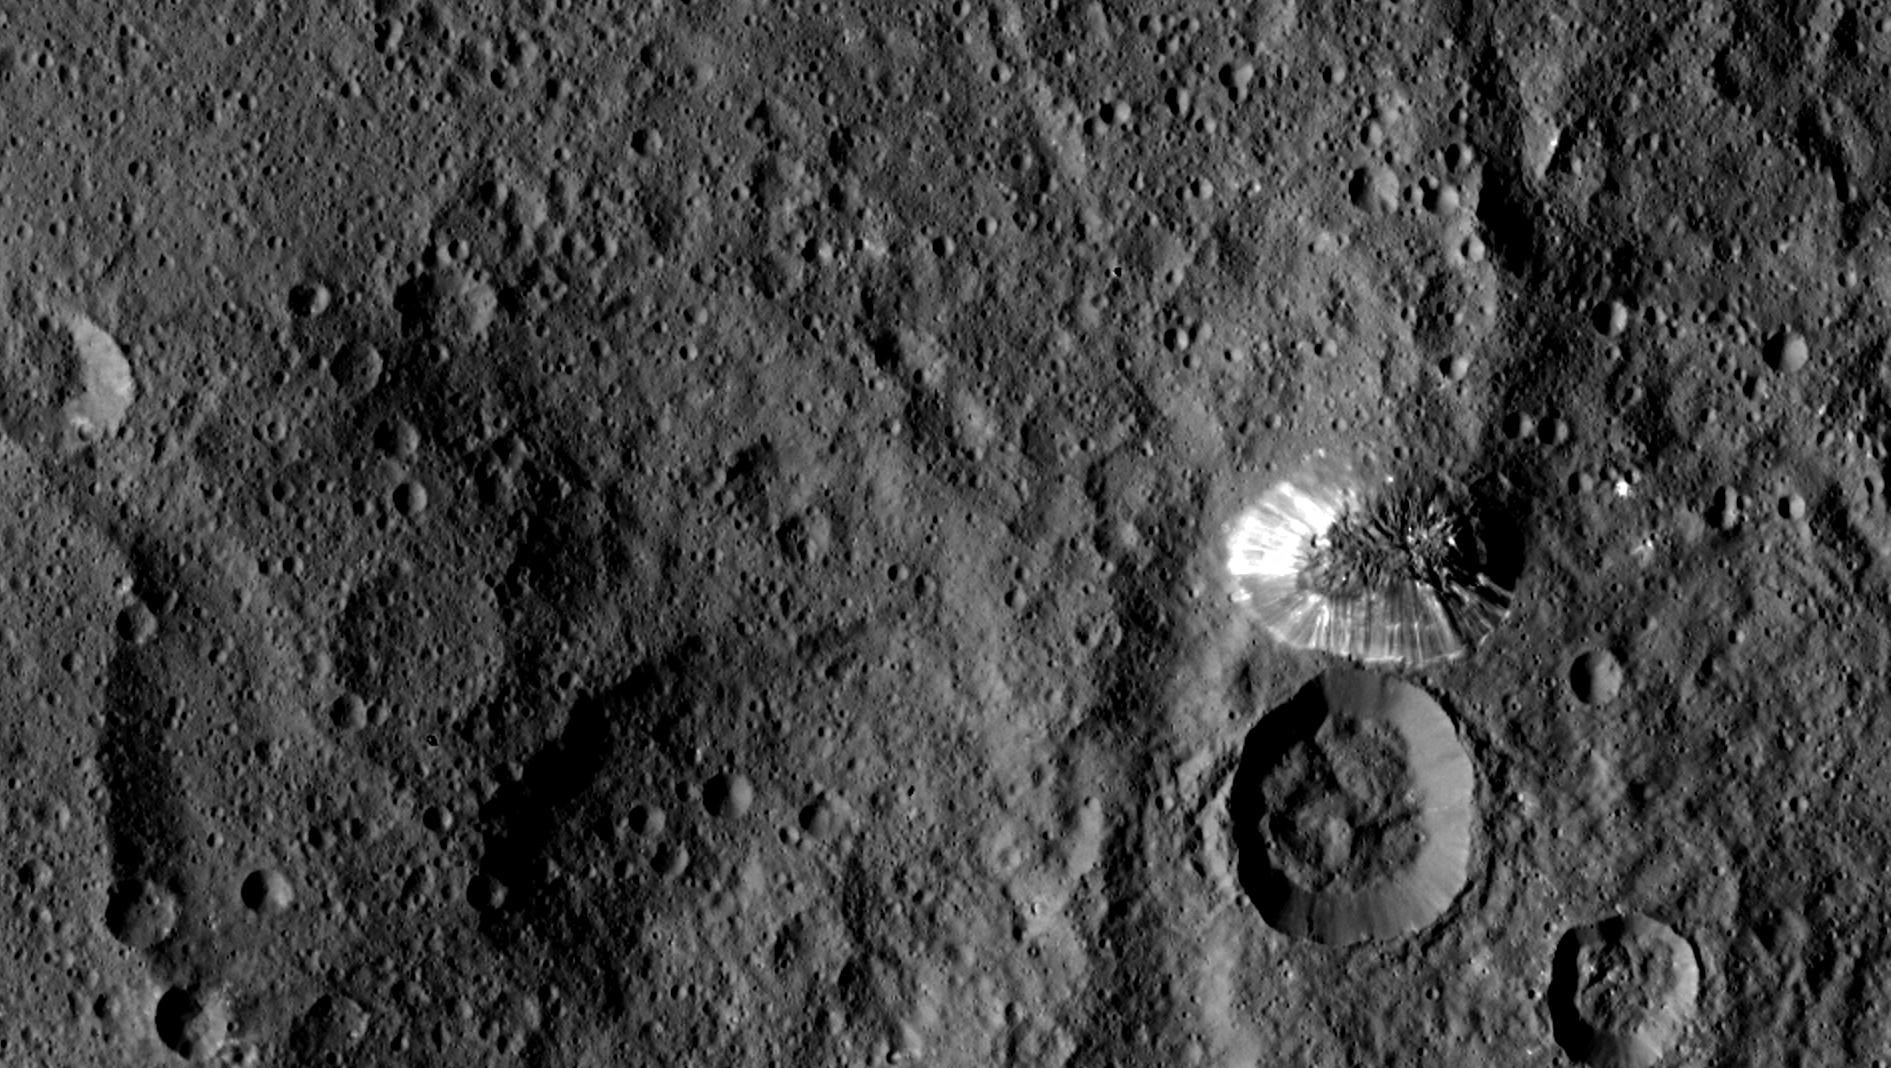 Rocks and craters on Ceres